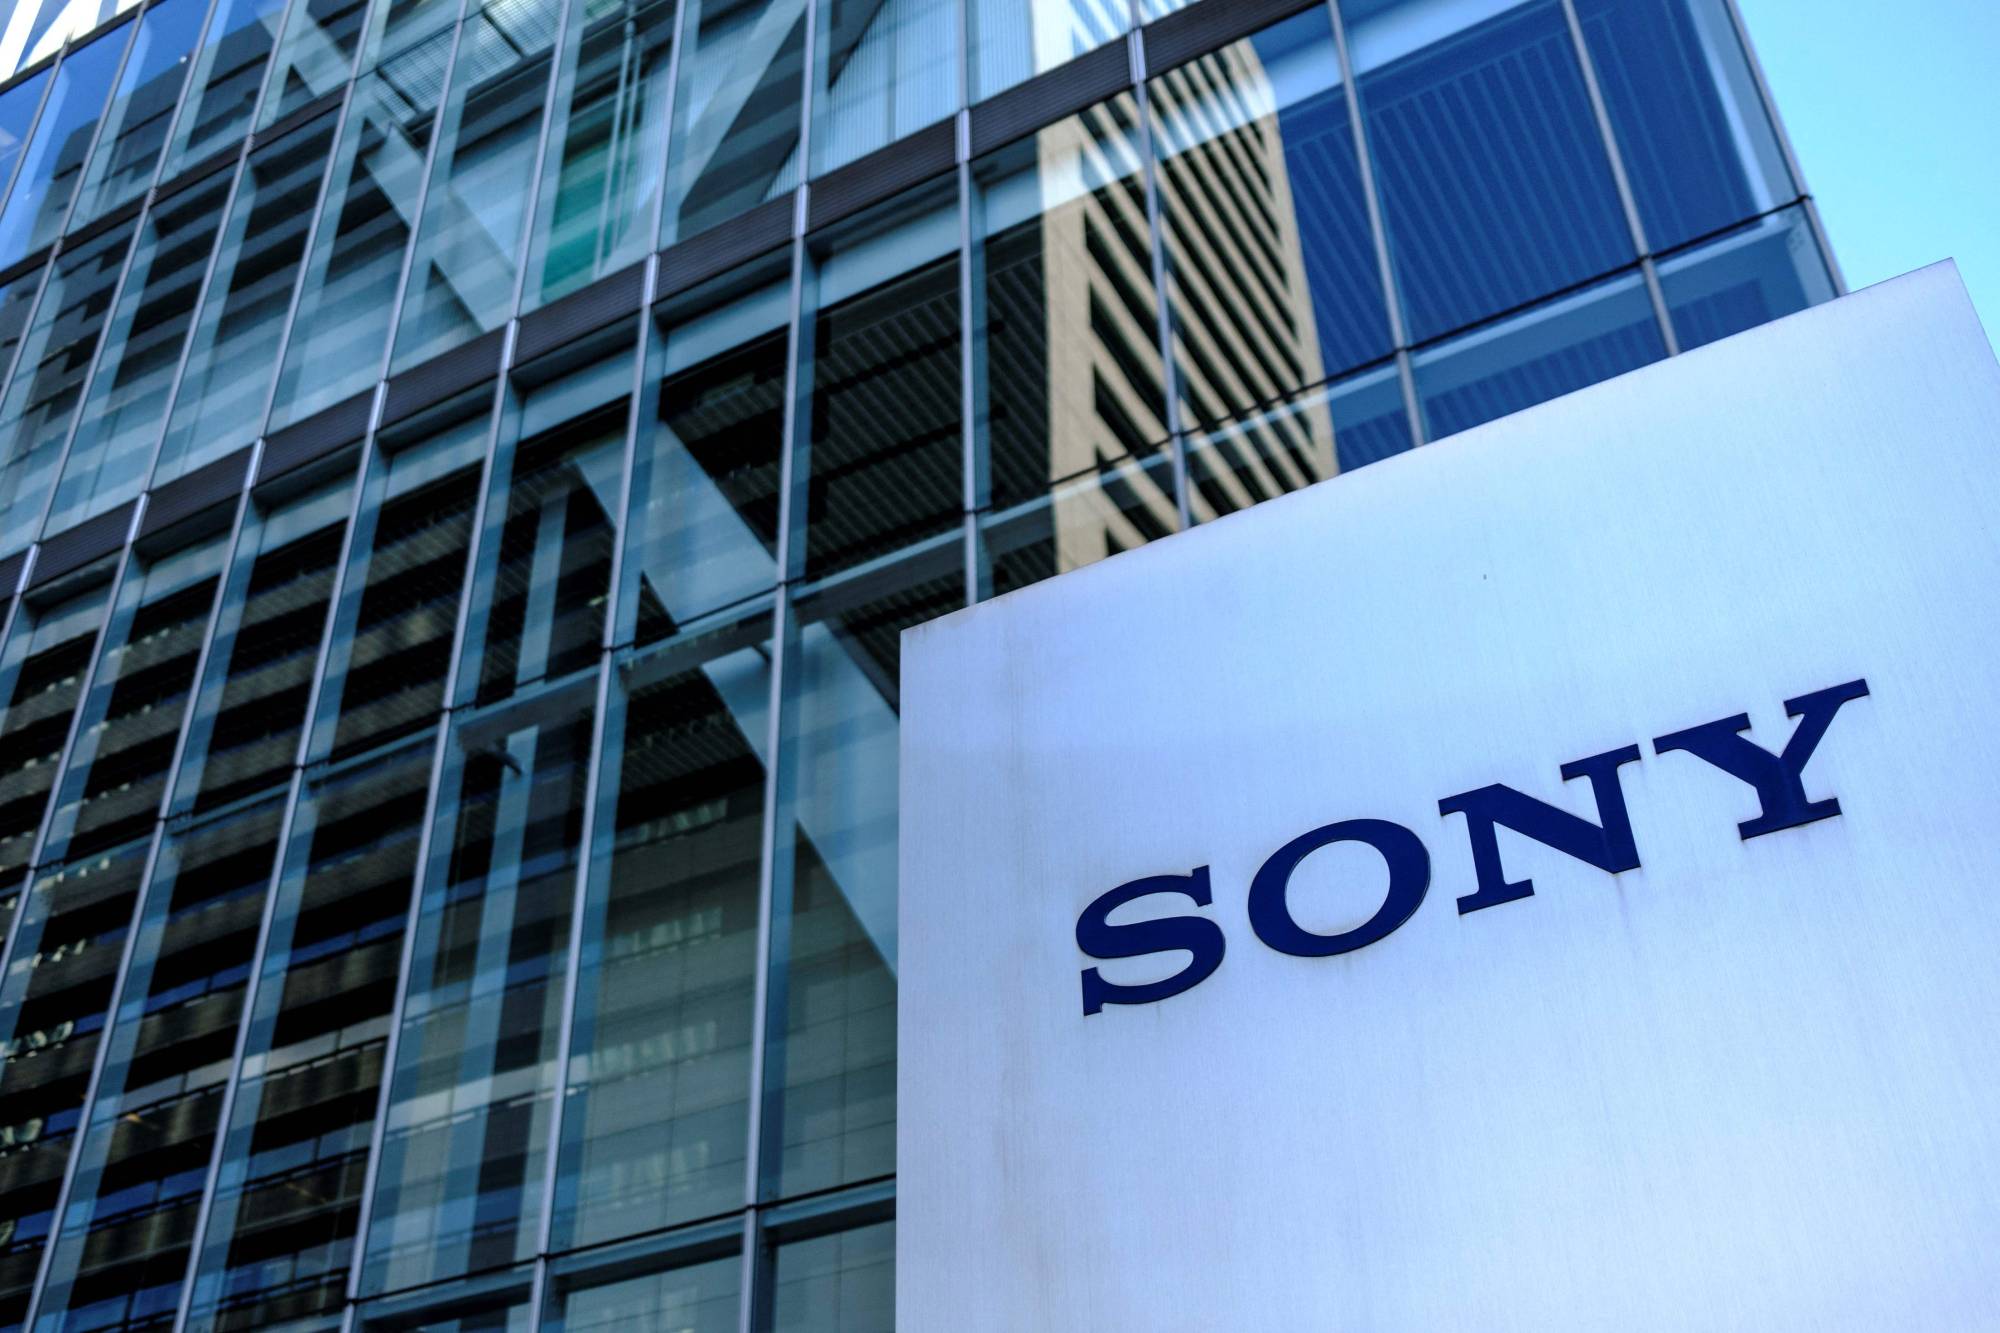 Sony profits soar as it benefits from home entertainment boom, Sony